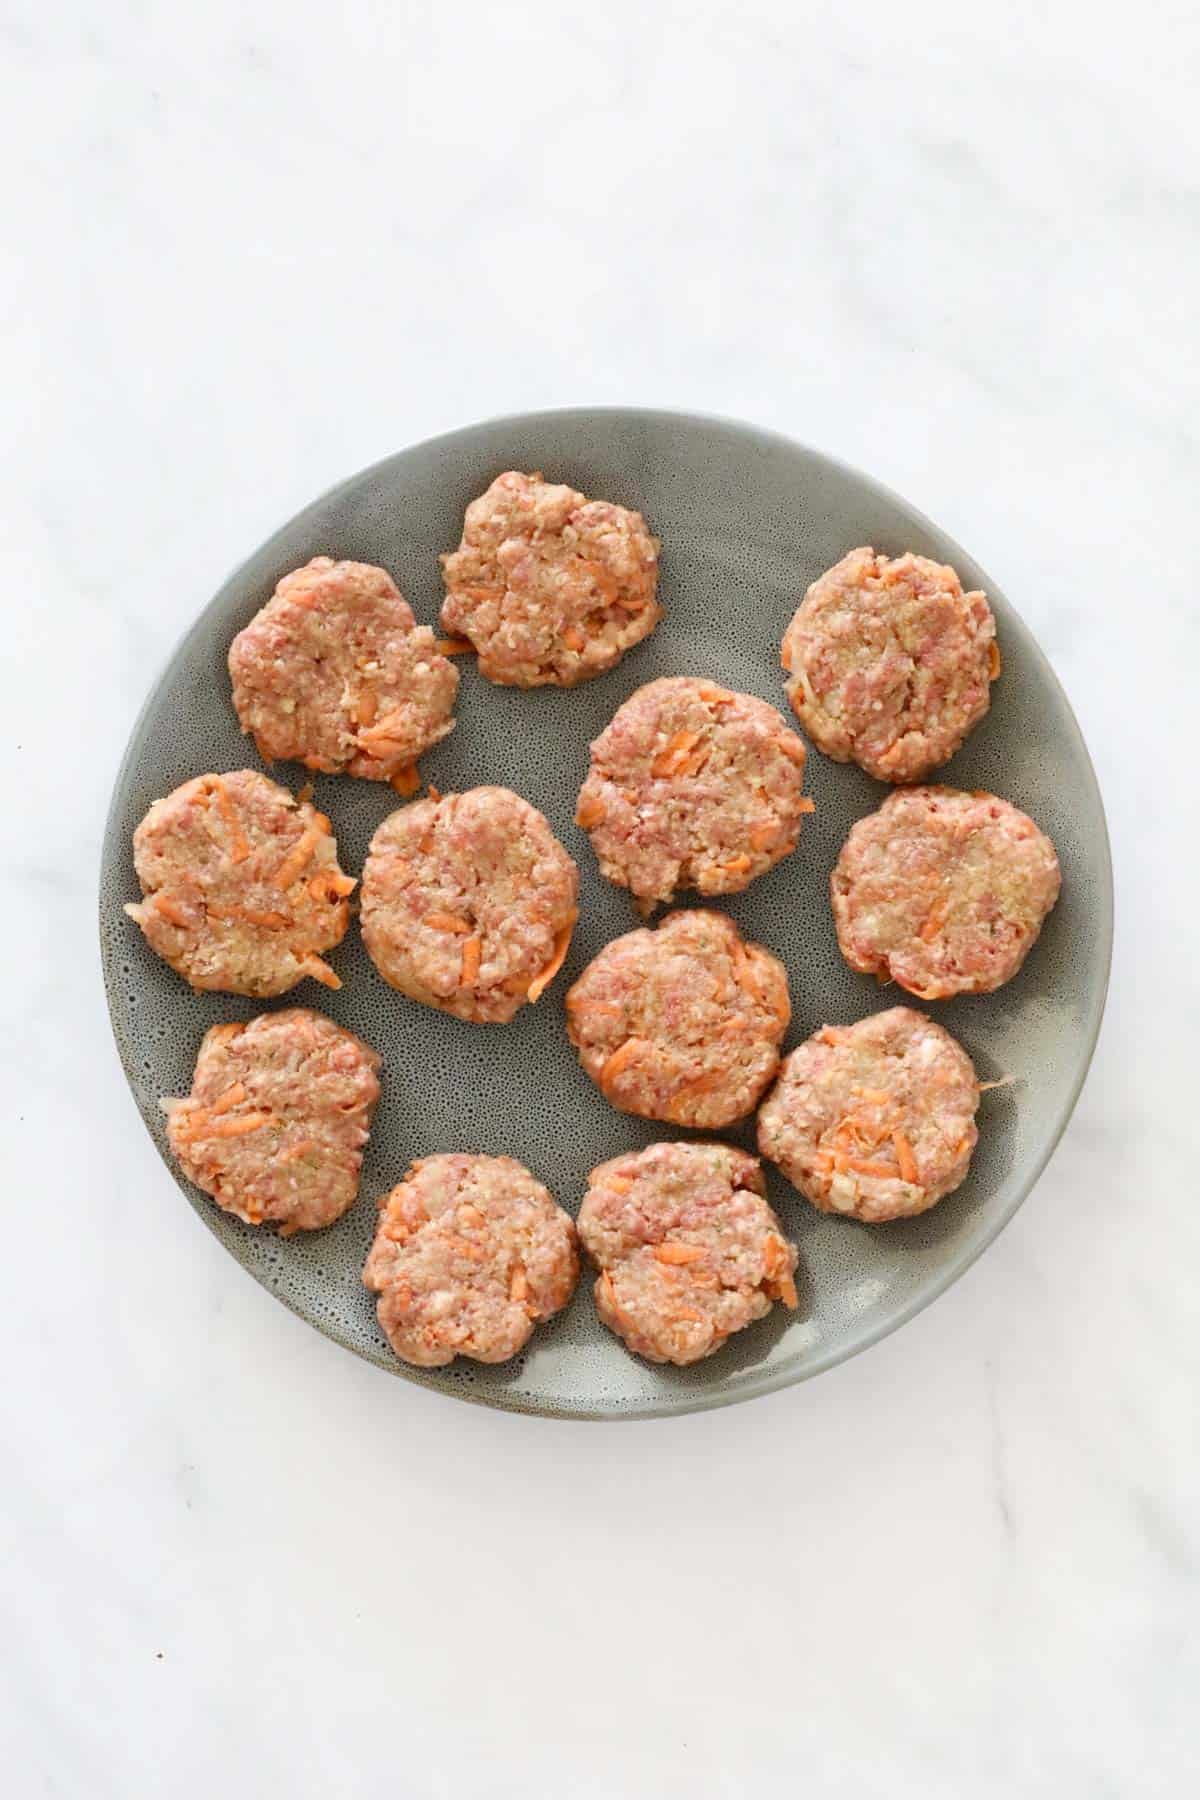 A plate of small uncooked mince patties.